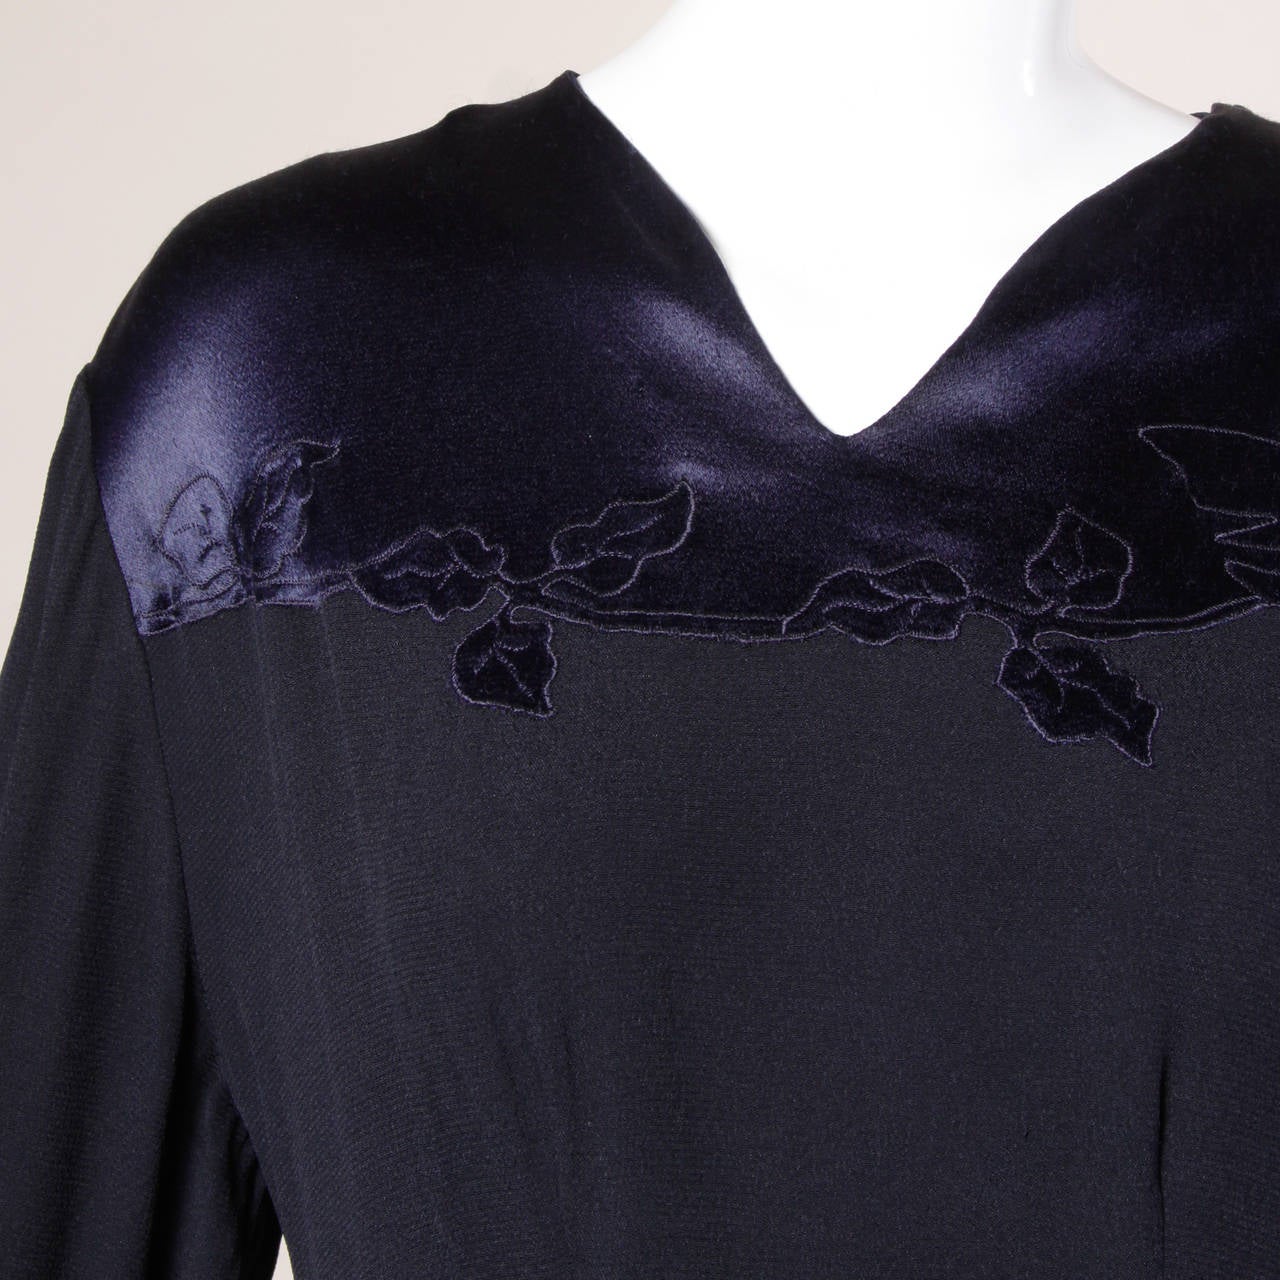 Vintage 1930s dress with dark blue satin ivy embroidery on crepe. 

Details:

Fully Lined
Button Closure At Shoulder and Wrist
Side Metal Zip Closure
Circa: 1930s
Marked Size: Not Marked
Estimated Size: L
Color: Blue
Fabric: Crepe/